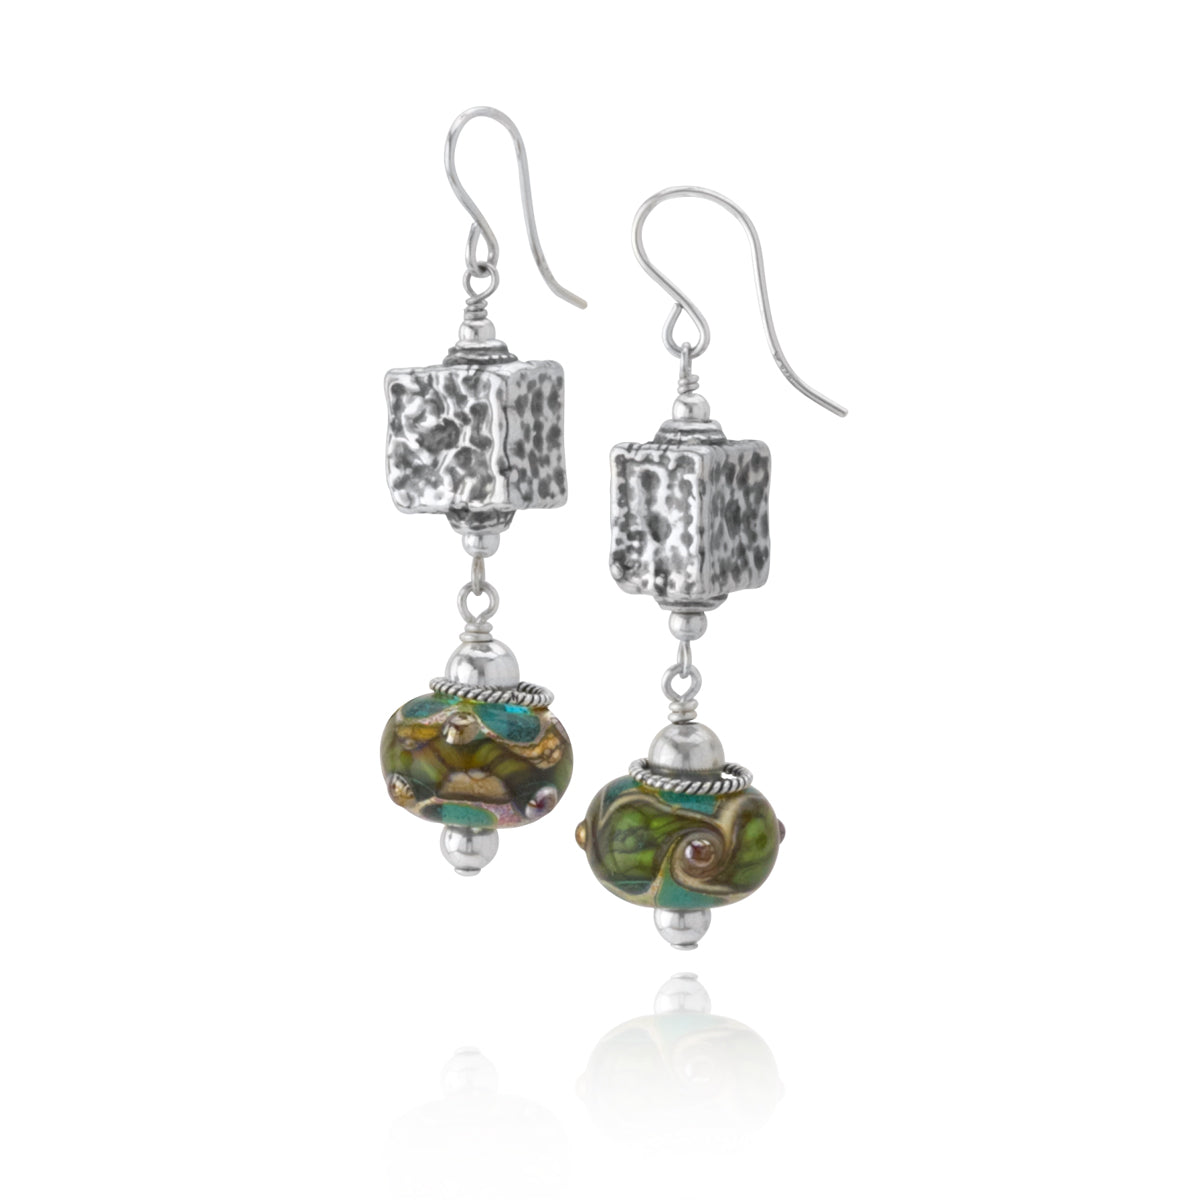 Hammered Sterling Silver and Lampwork Earrings